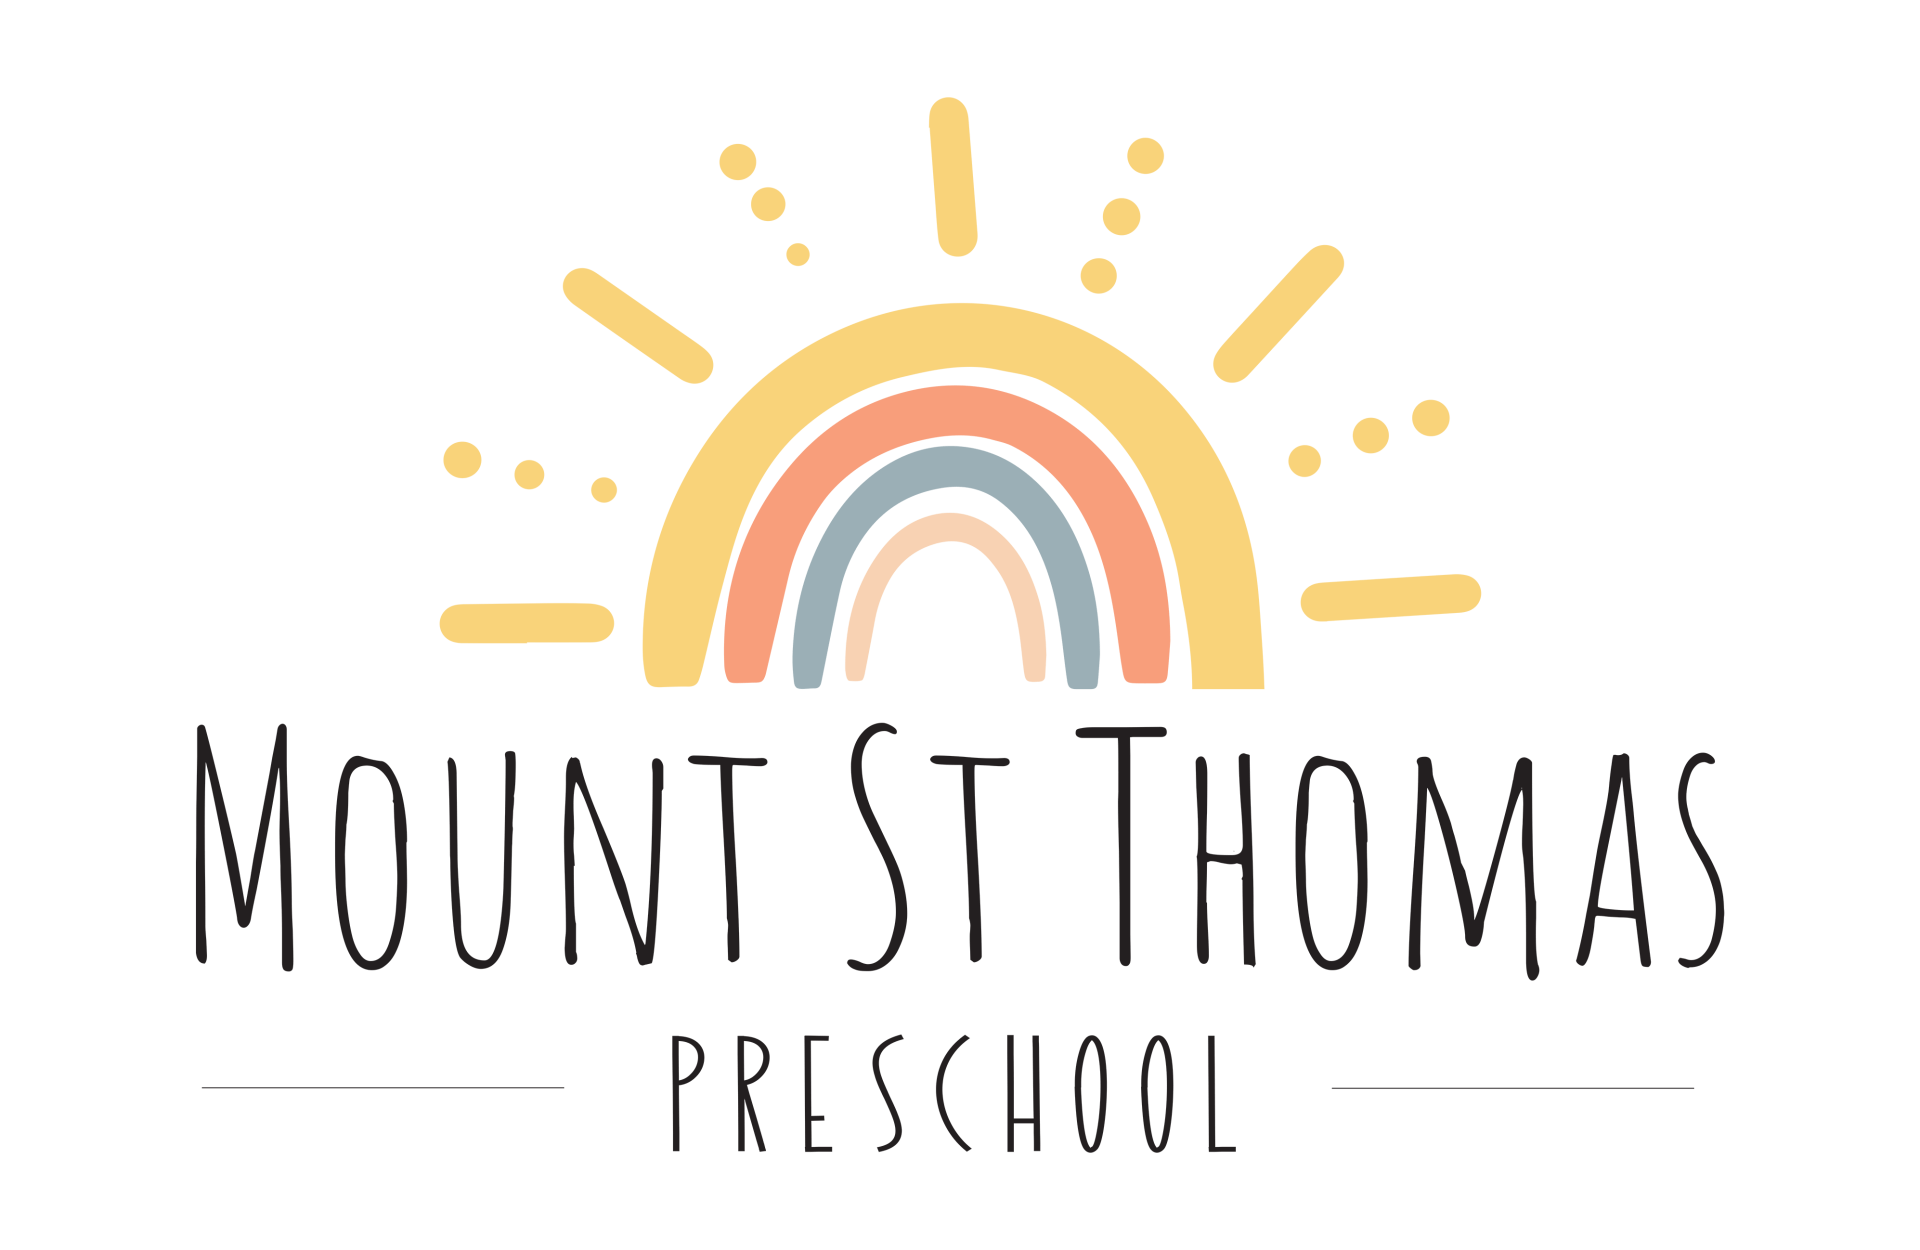 Mount St Thomas Preschool is a Play-Based Centre in Wollongong